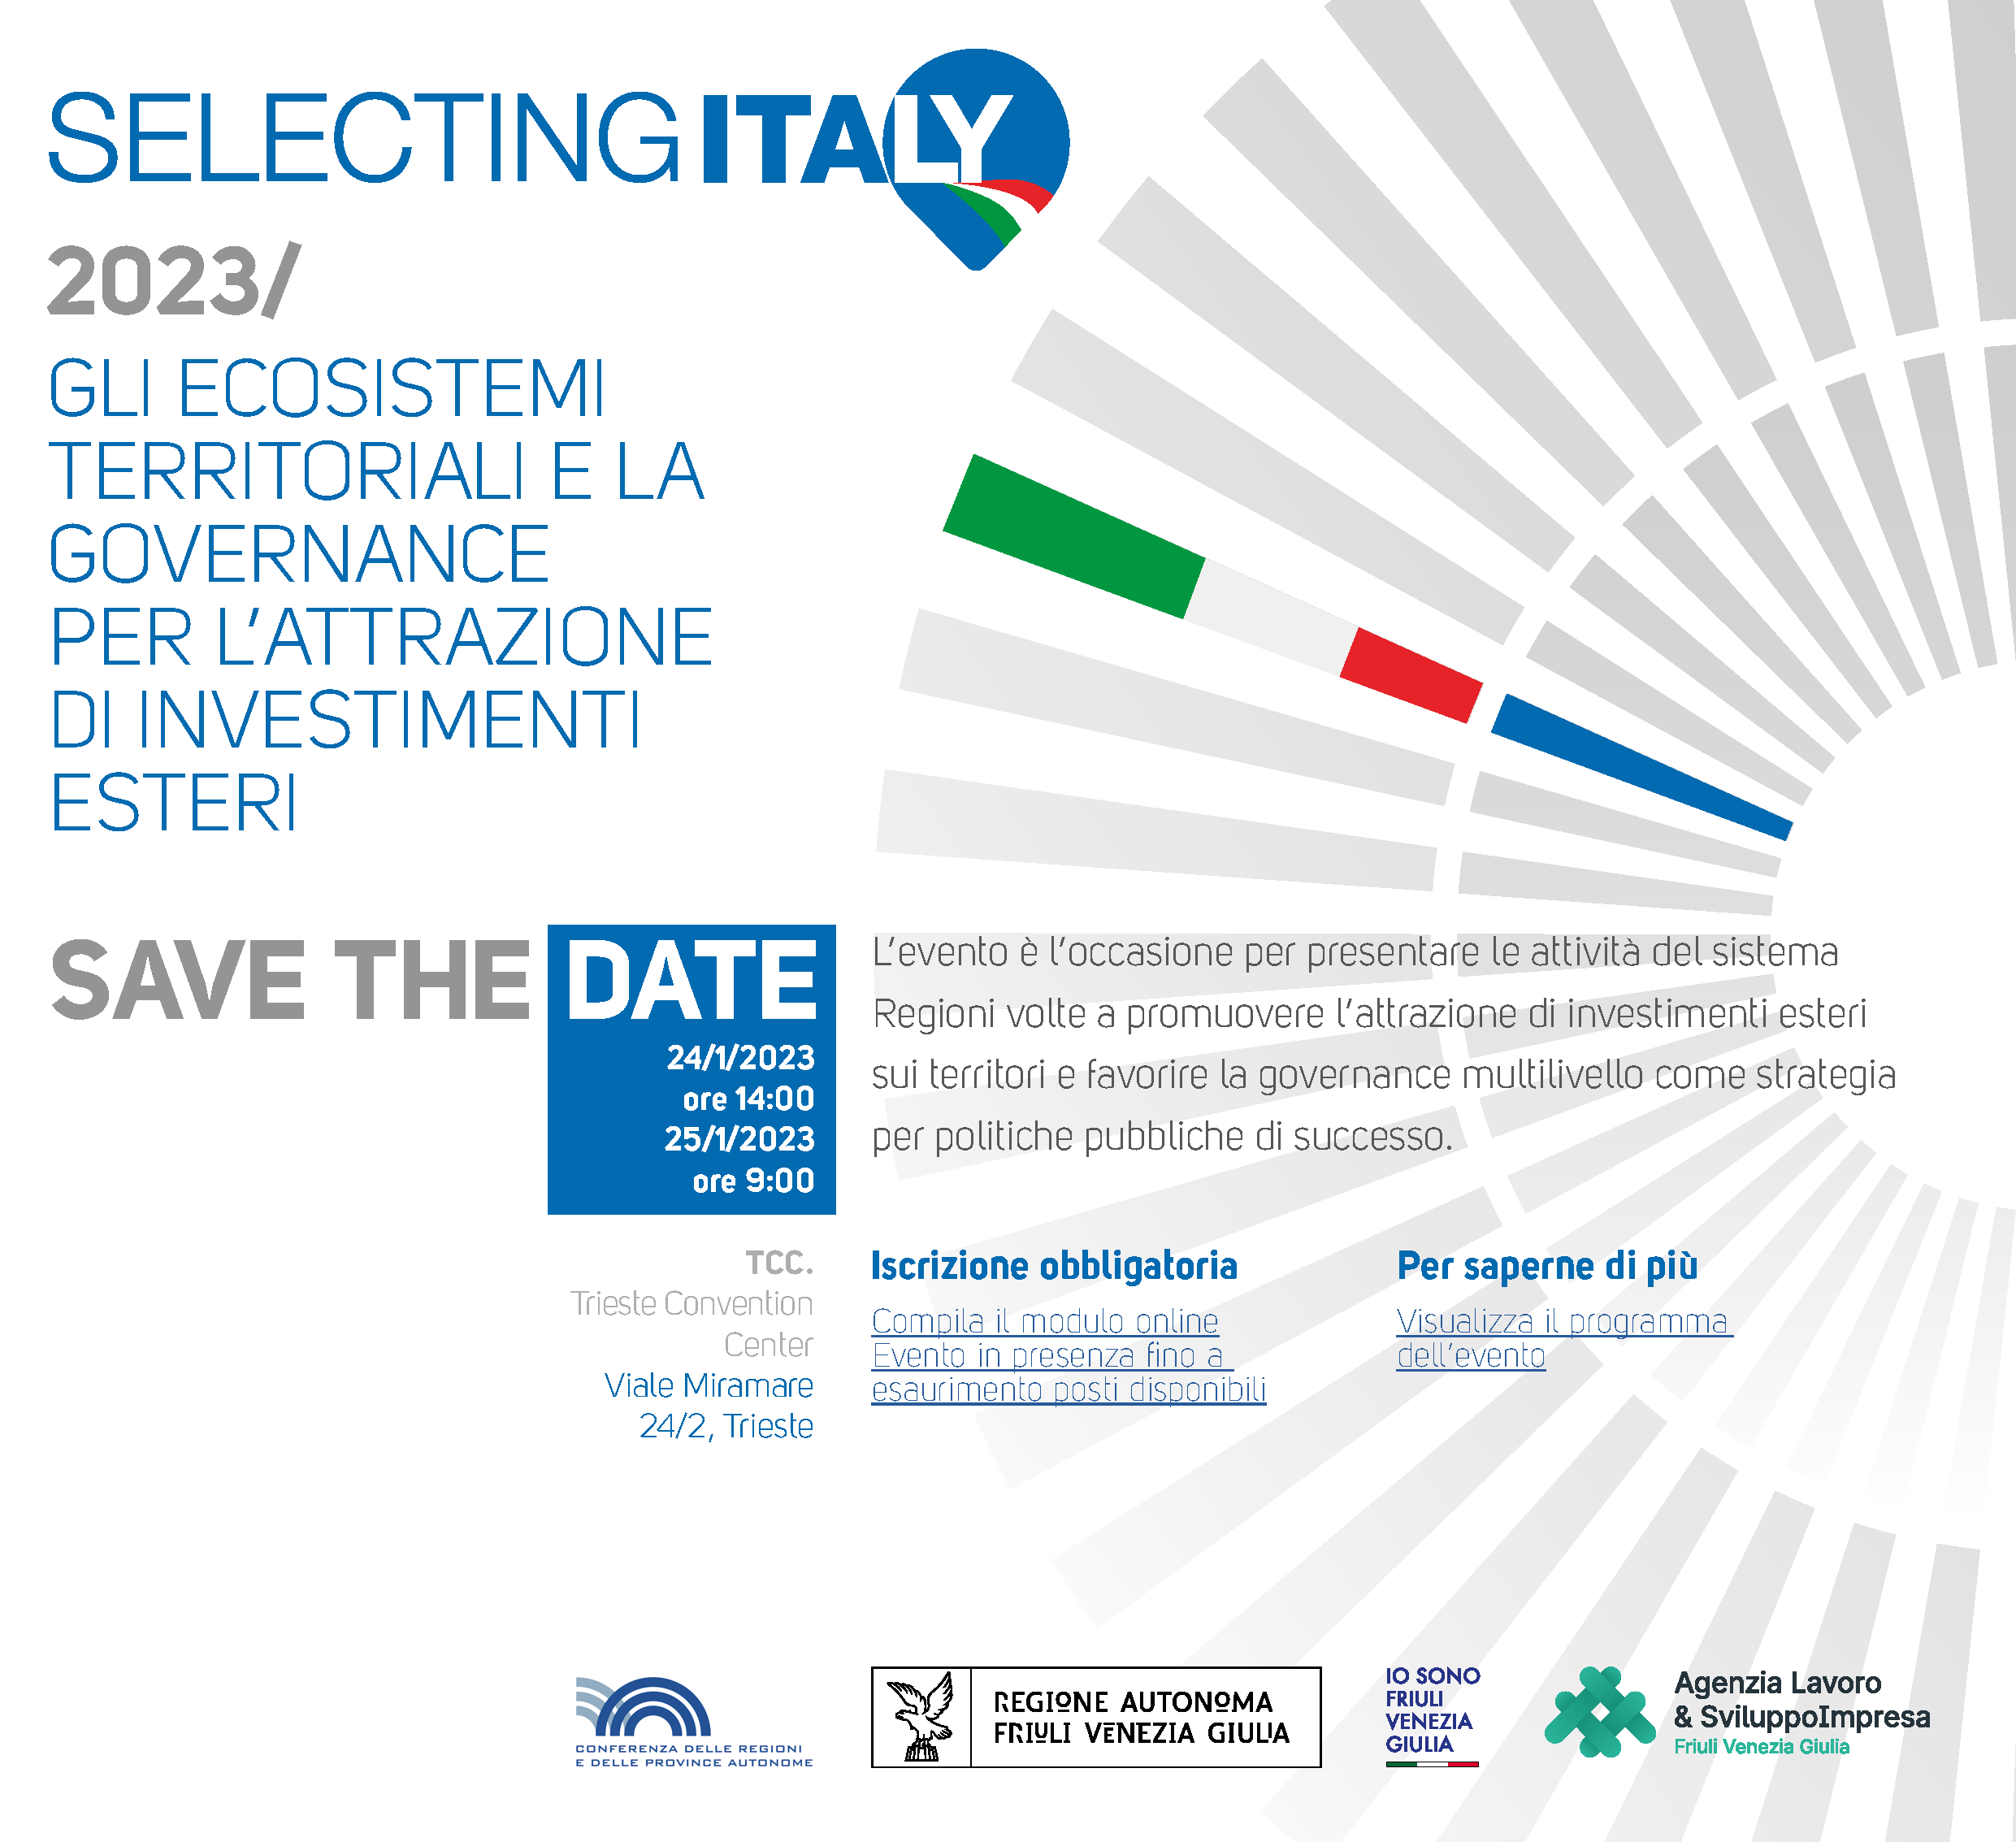 file/ELEMENTO_NEWSLETTER/25149/save_the_date_fvg.png